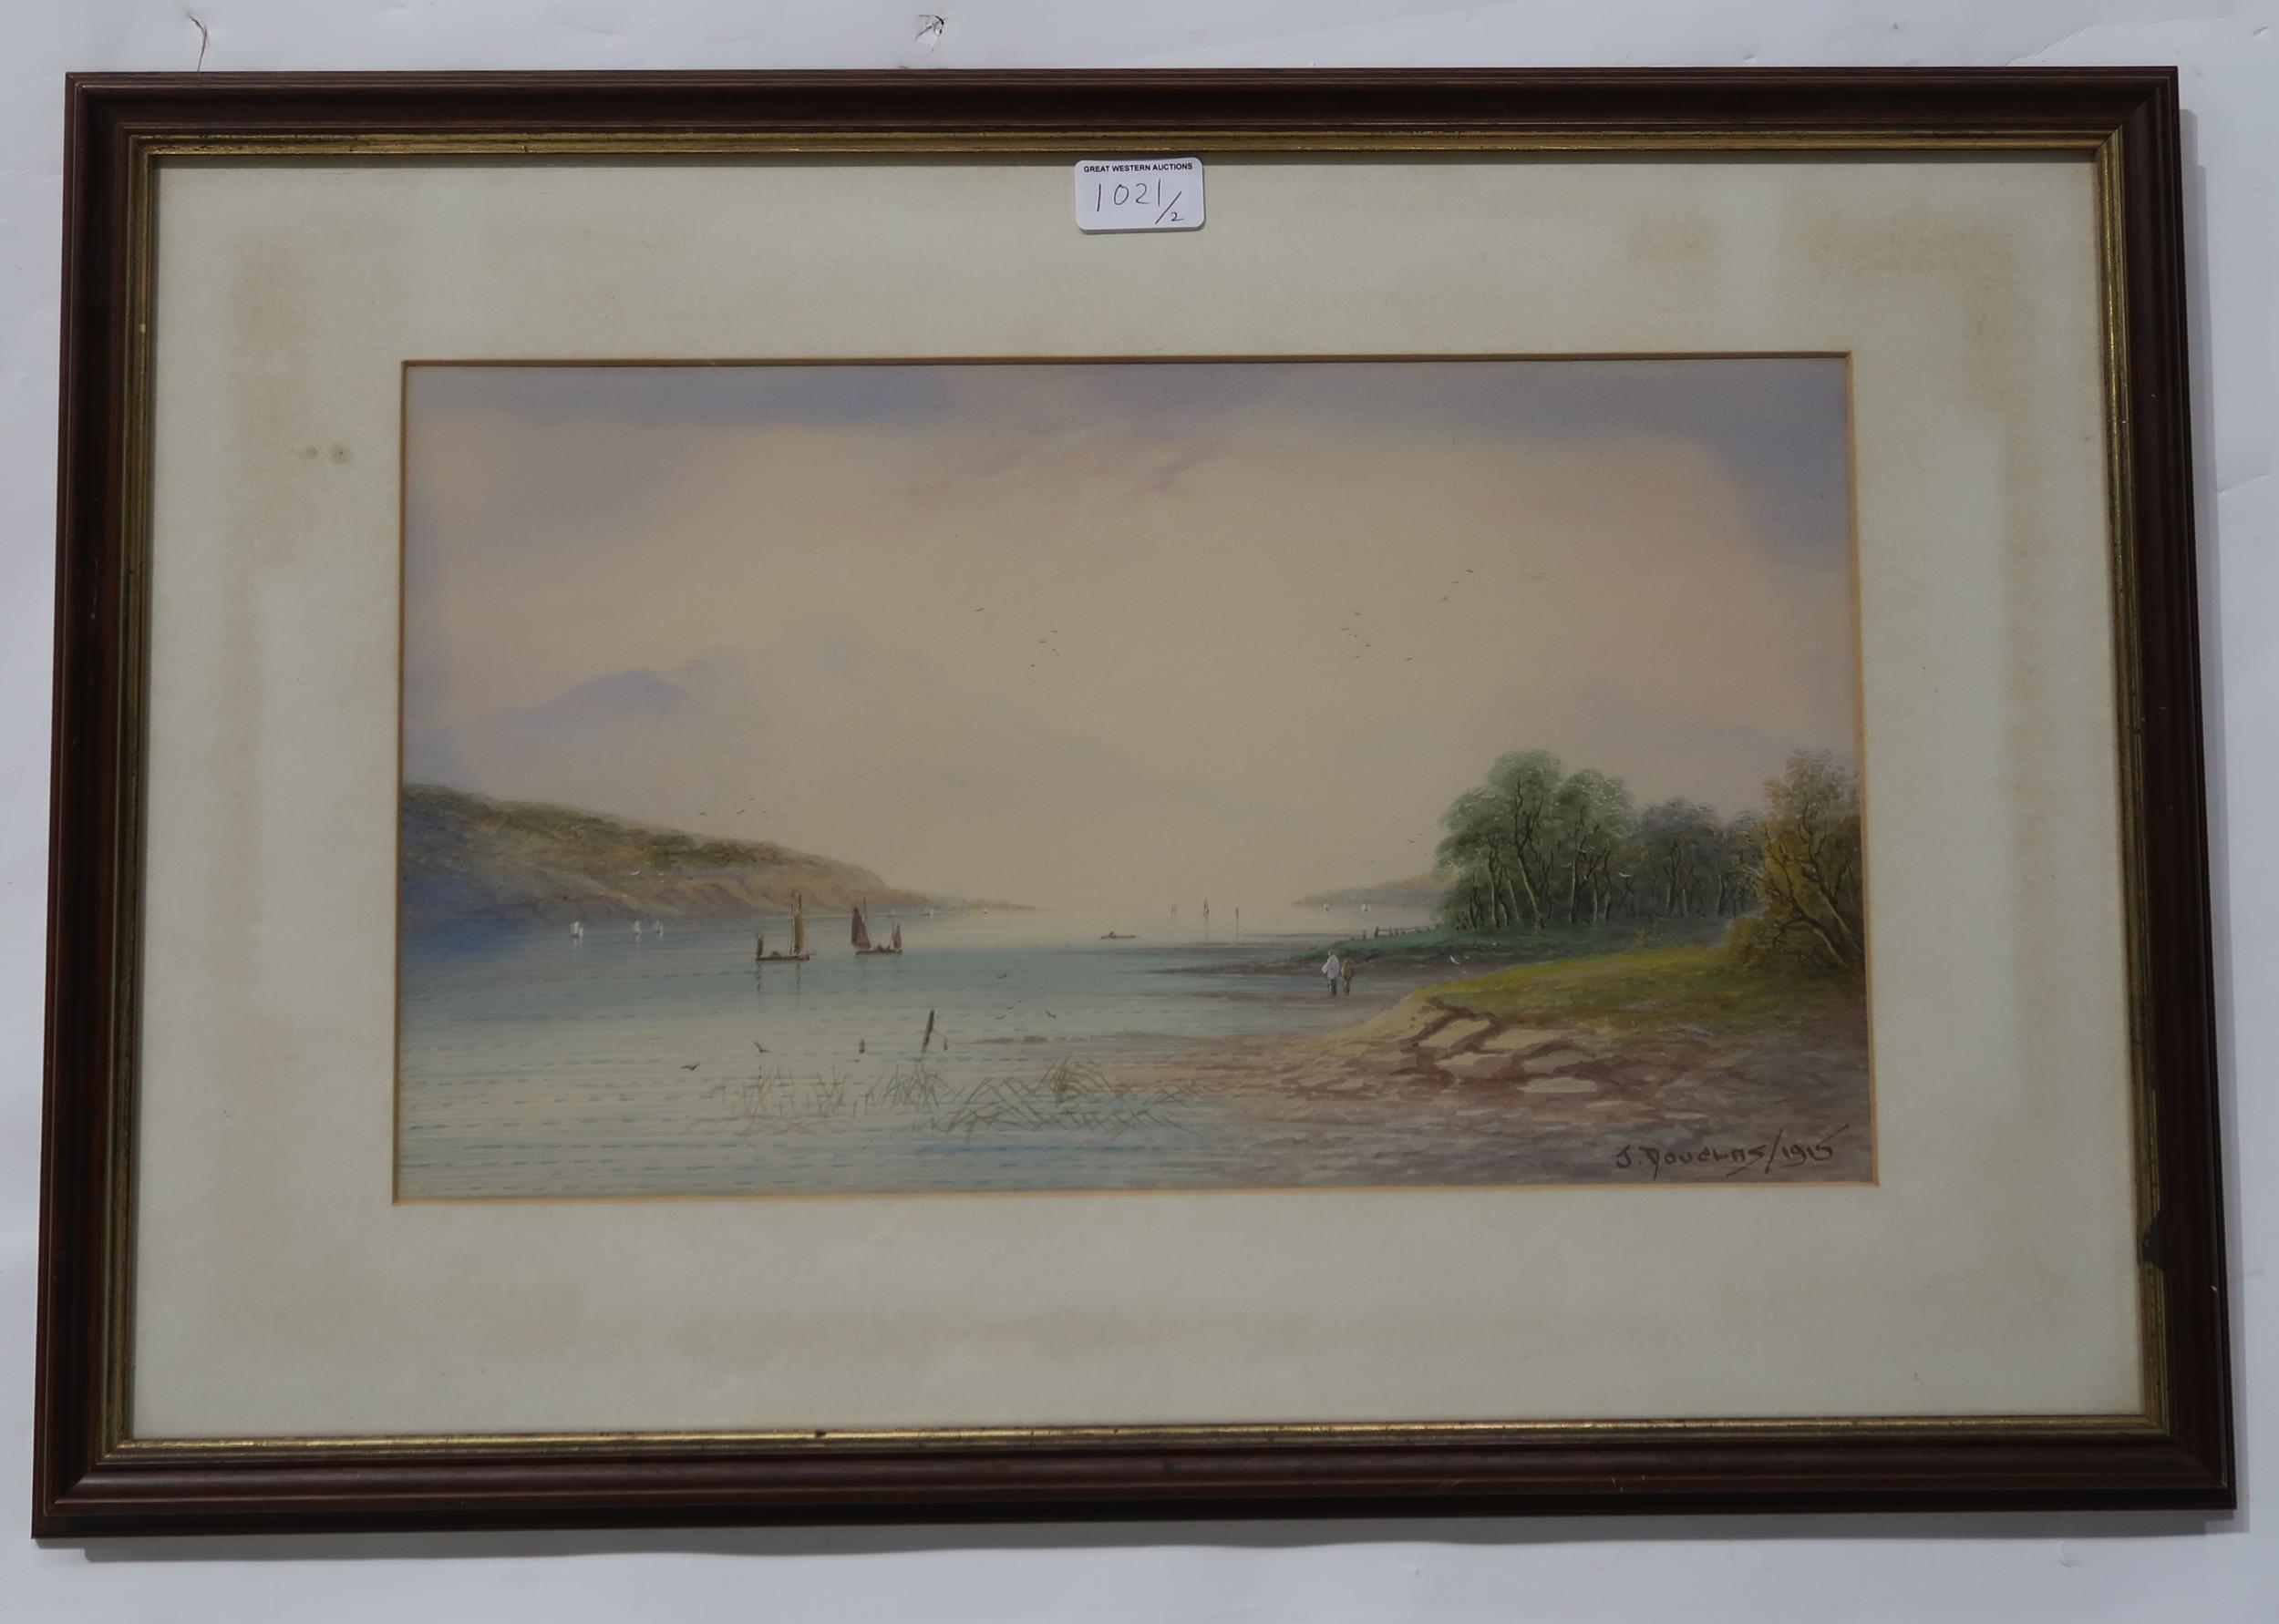 J DOUGLAS River scene and coastal village, signed, watercolour, dated, 1914/15, 25 x 43cm and 23 x - Image 4 of 5